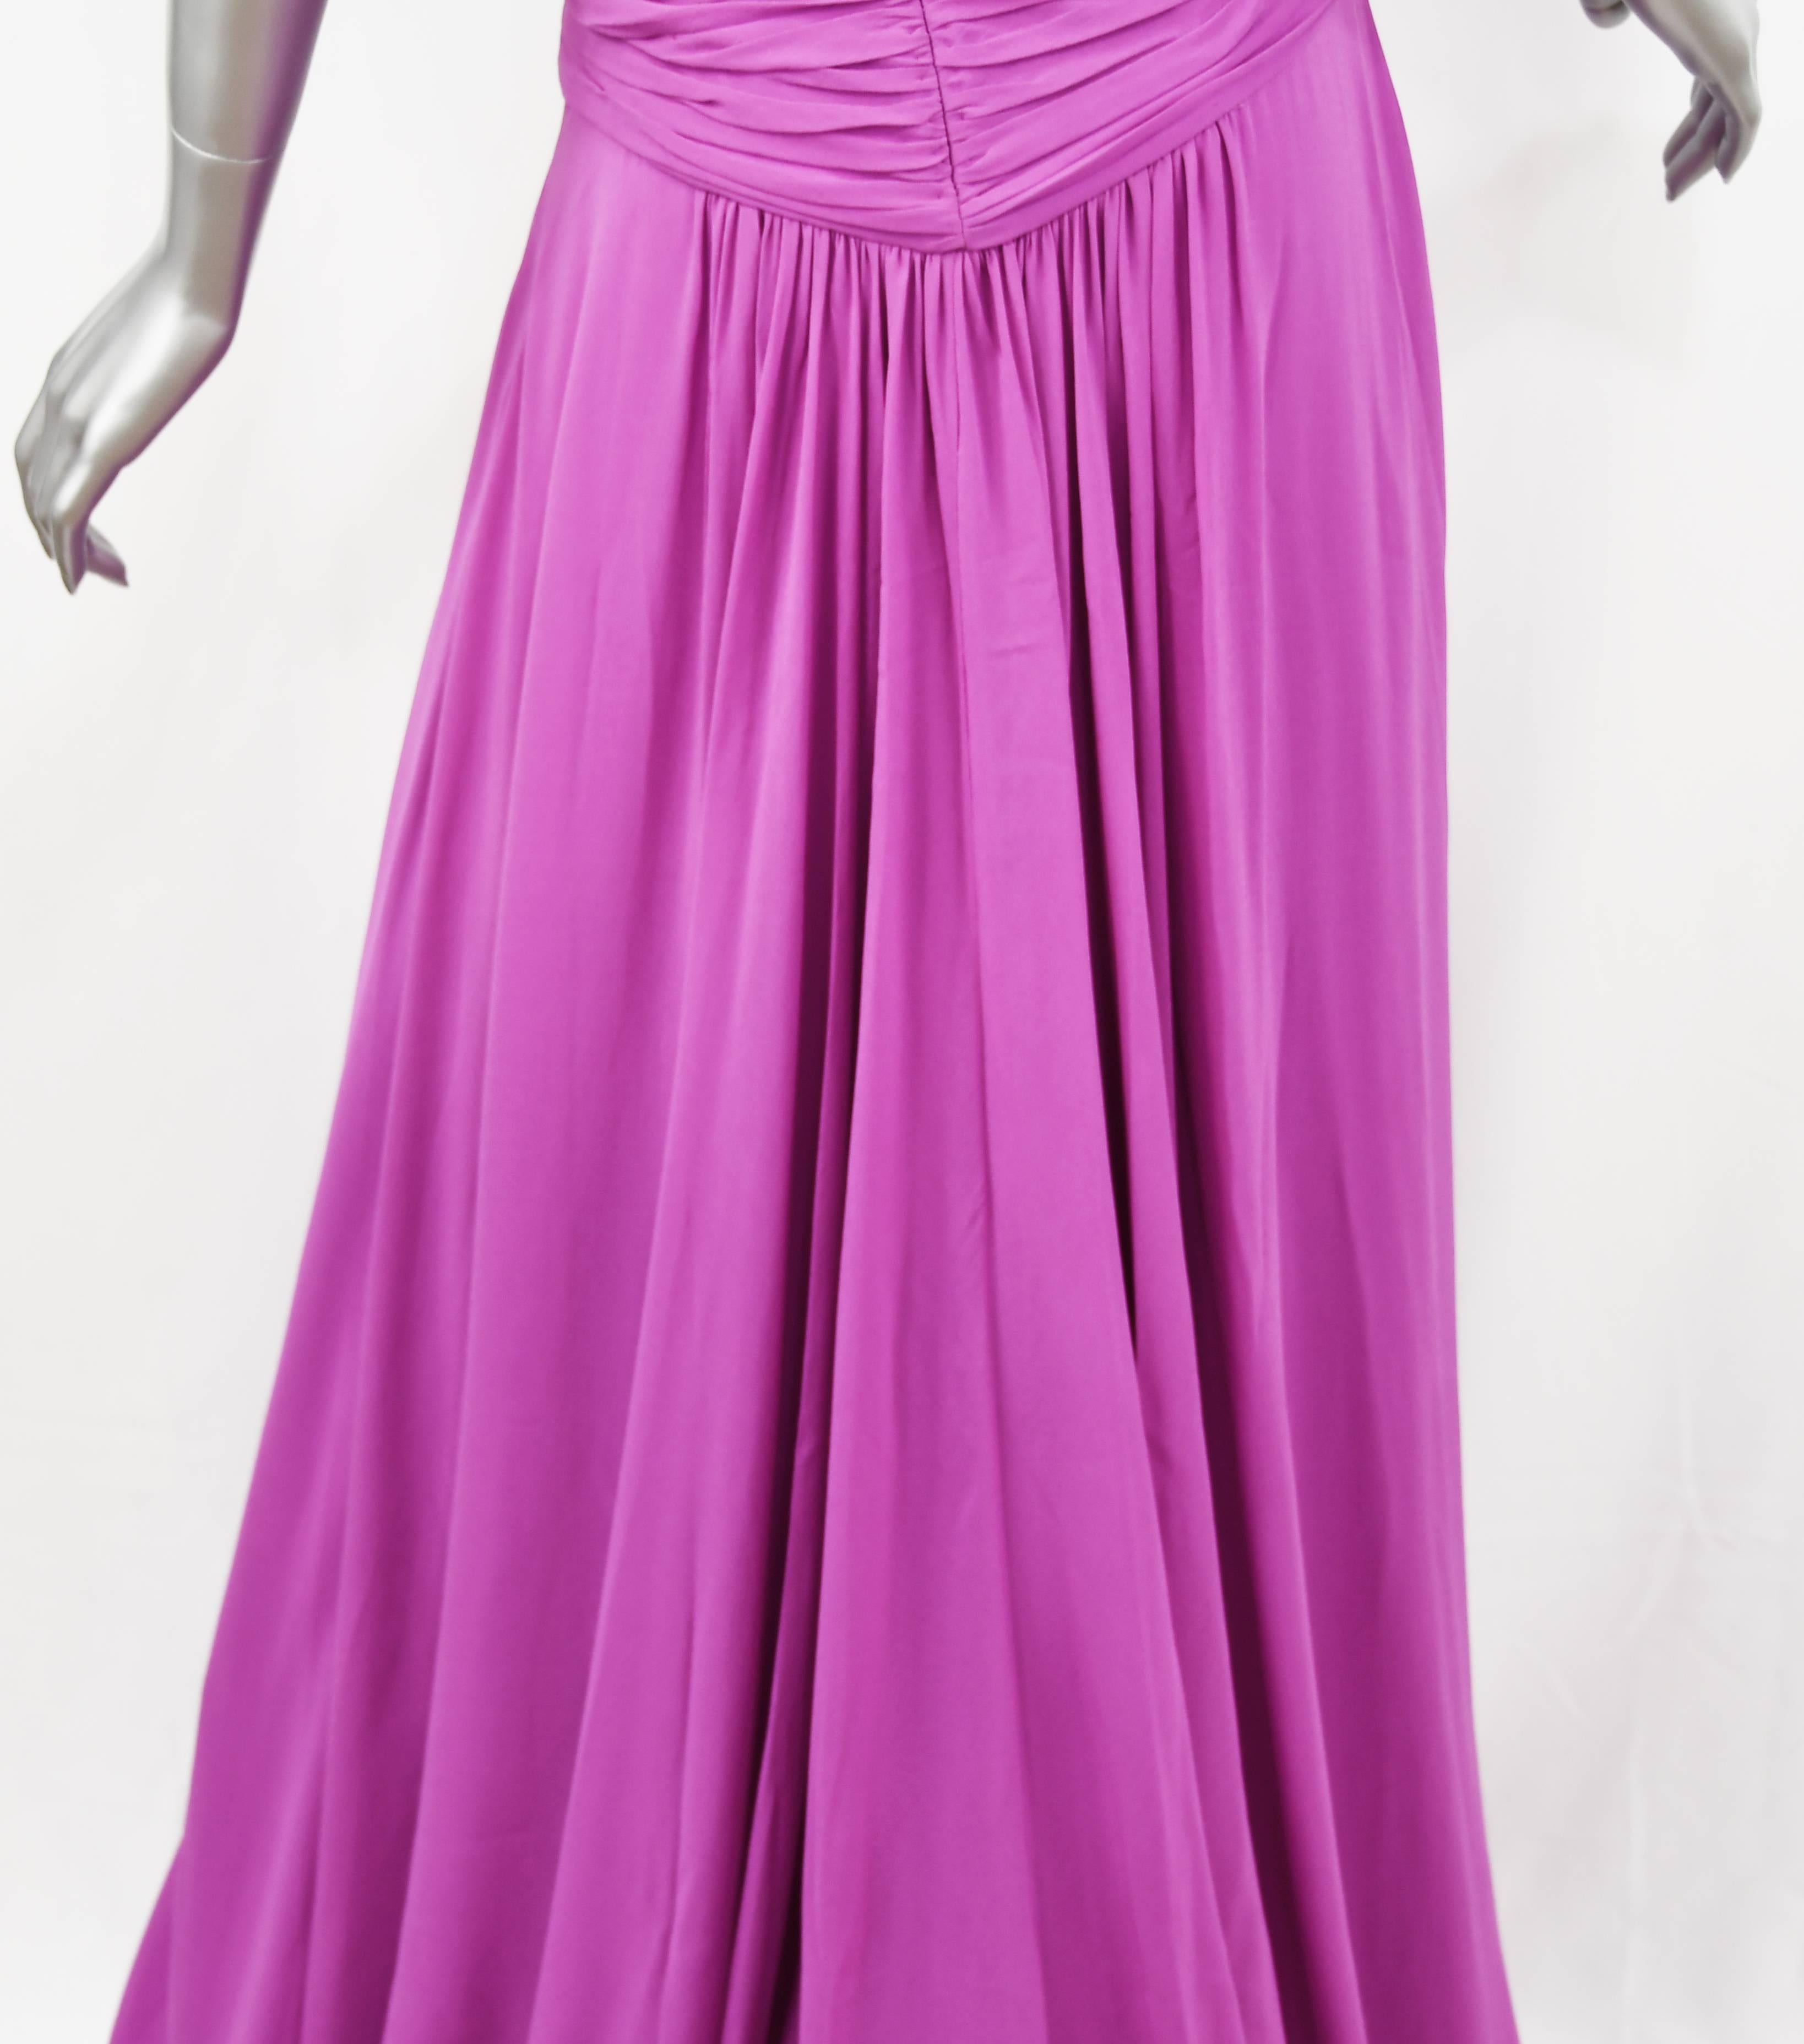 Emanuel Ungaro Long Chiffon Gown in Magenta, Size 4 For Sale 3